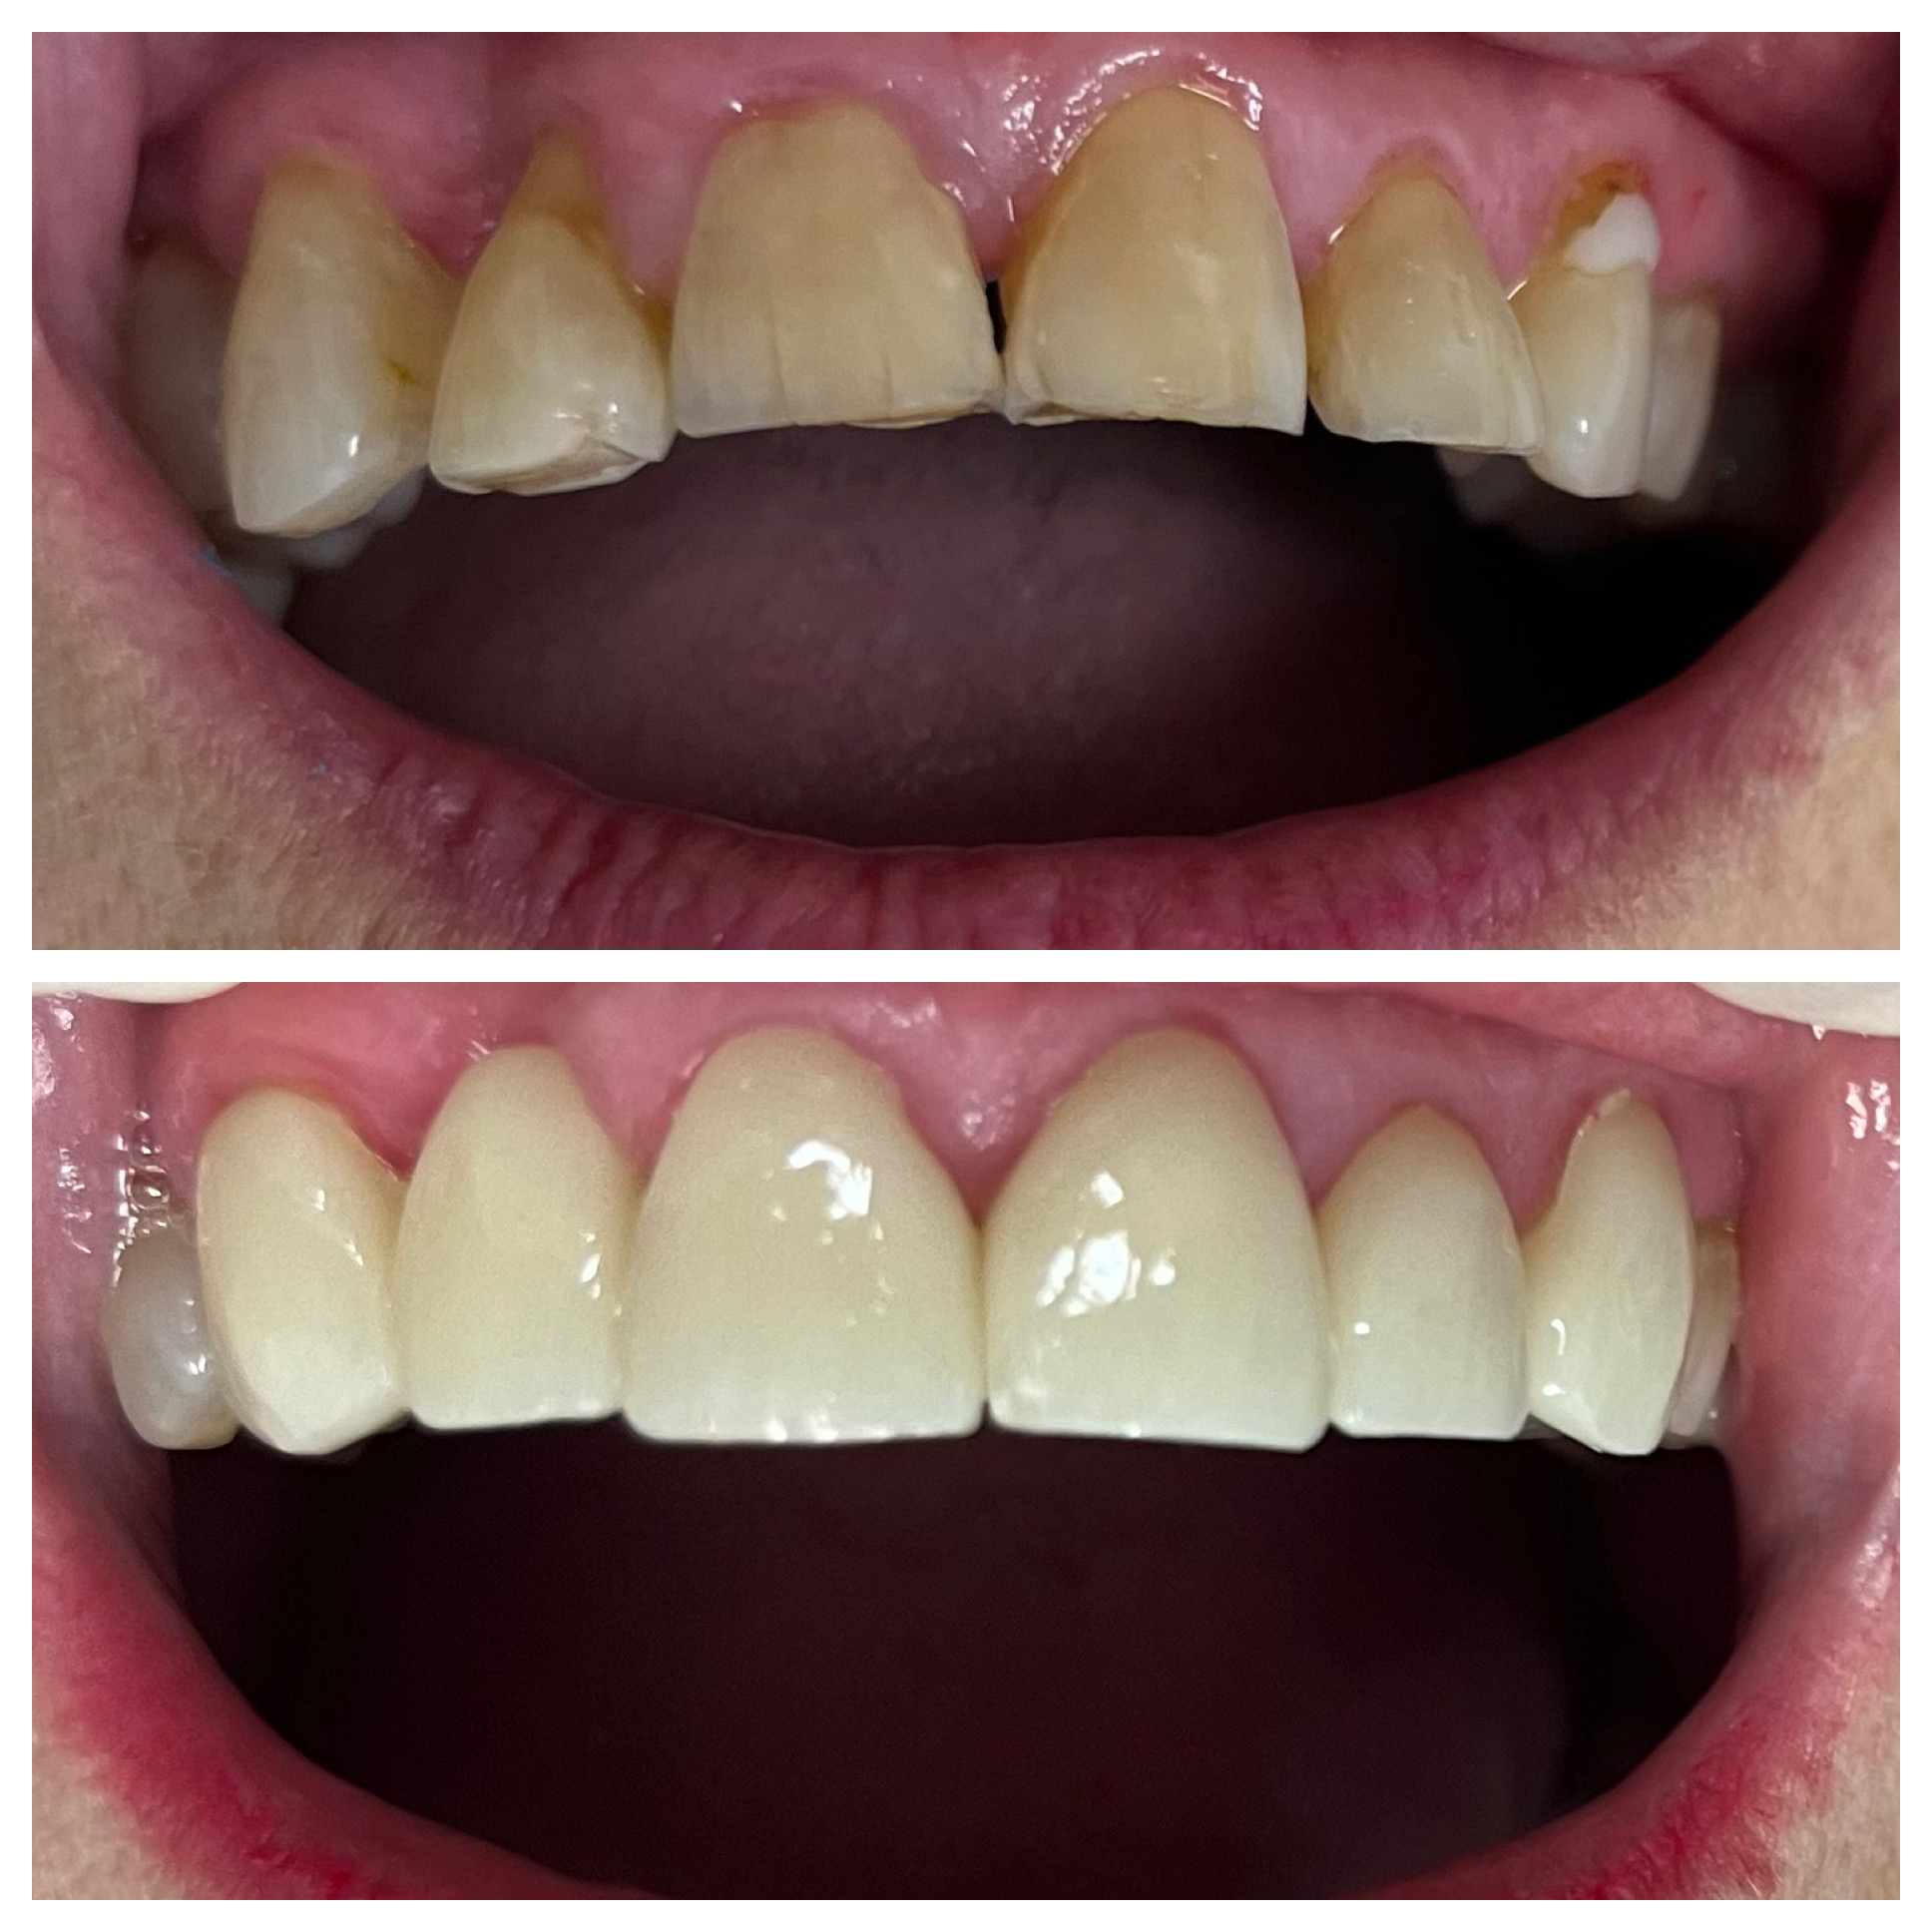 Yellowed and damaged front teeth